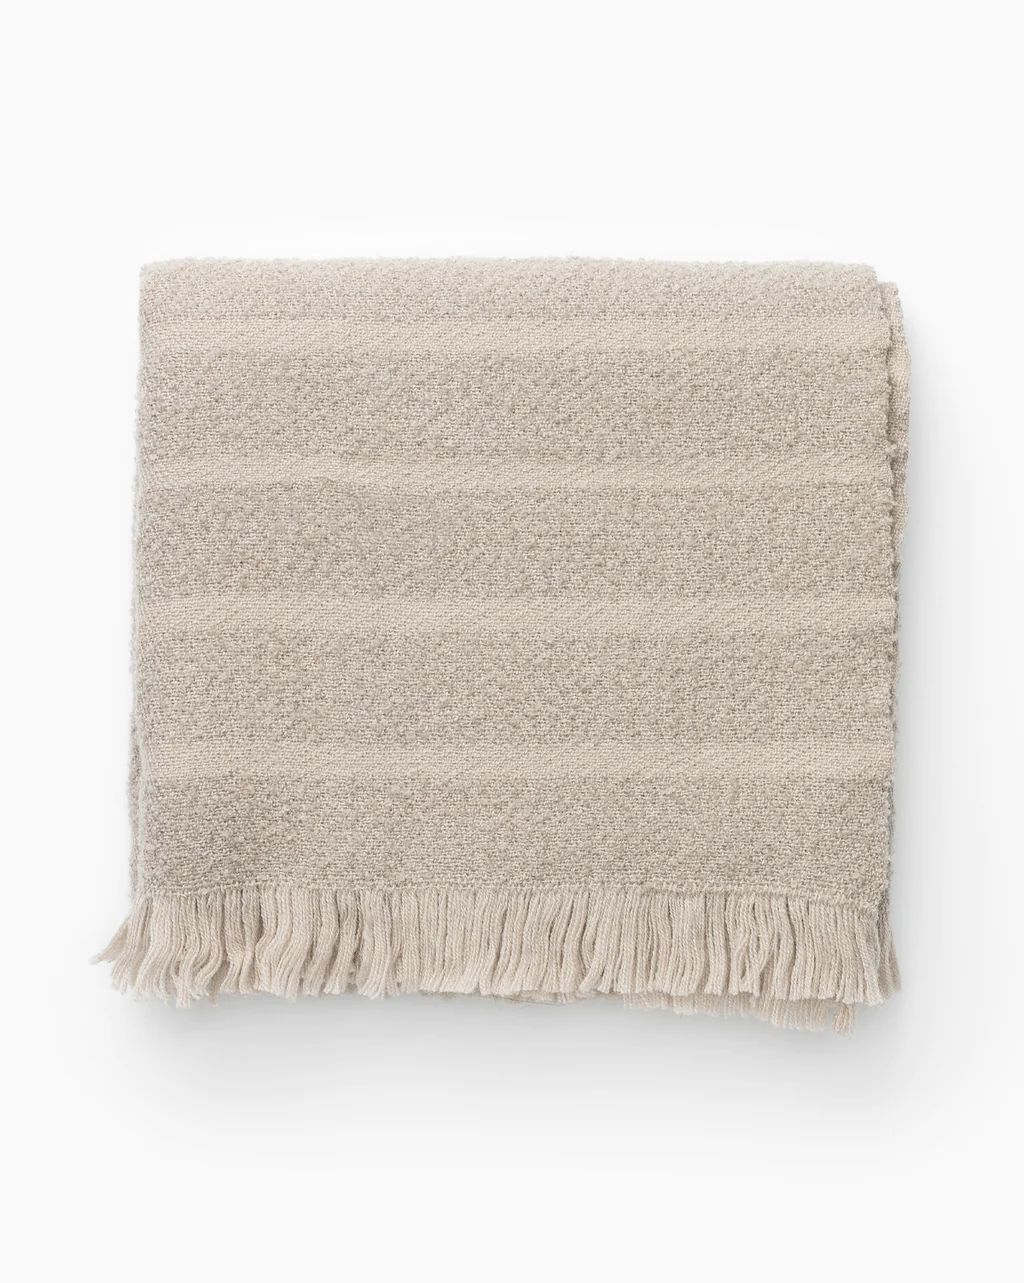 Quinlan Boucle Wool Throw | McGee & Co.